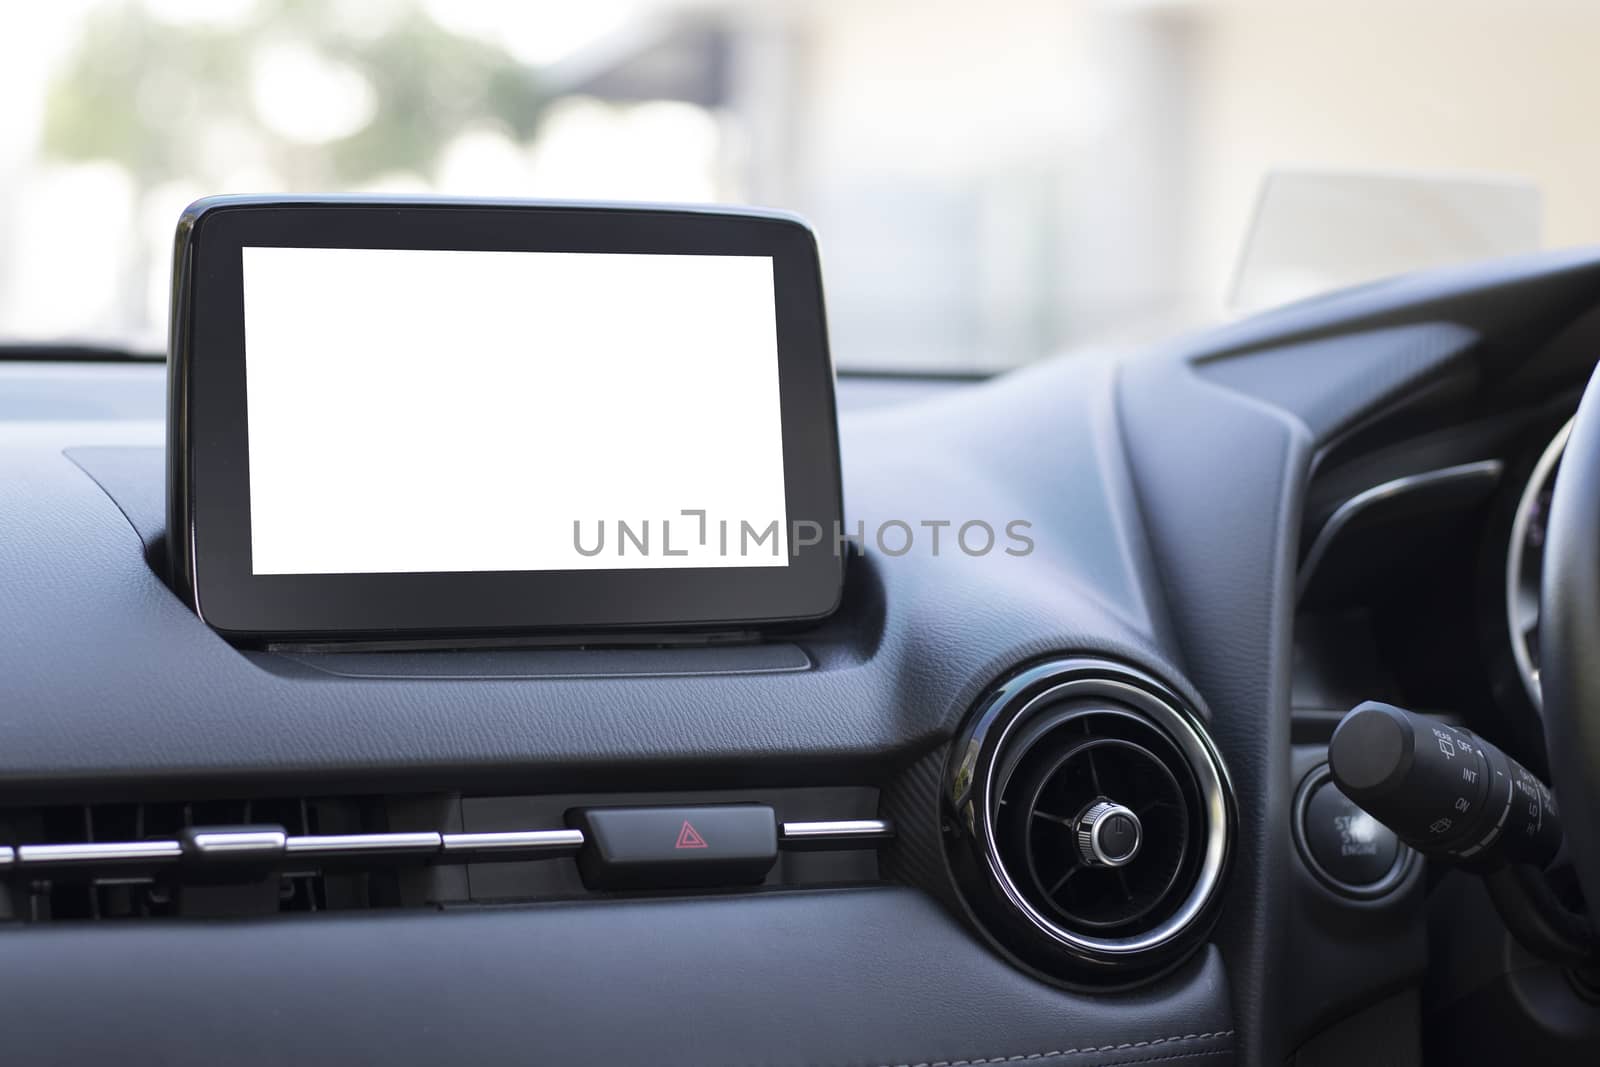 Touch screen monitor for using various applications such as entertainment,communications,navigation. Touch screen for operating various car applications. by Eungsuwat